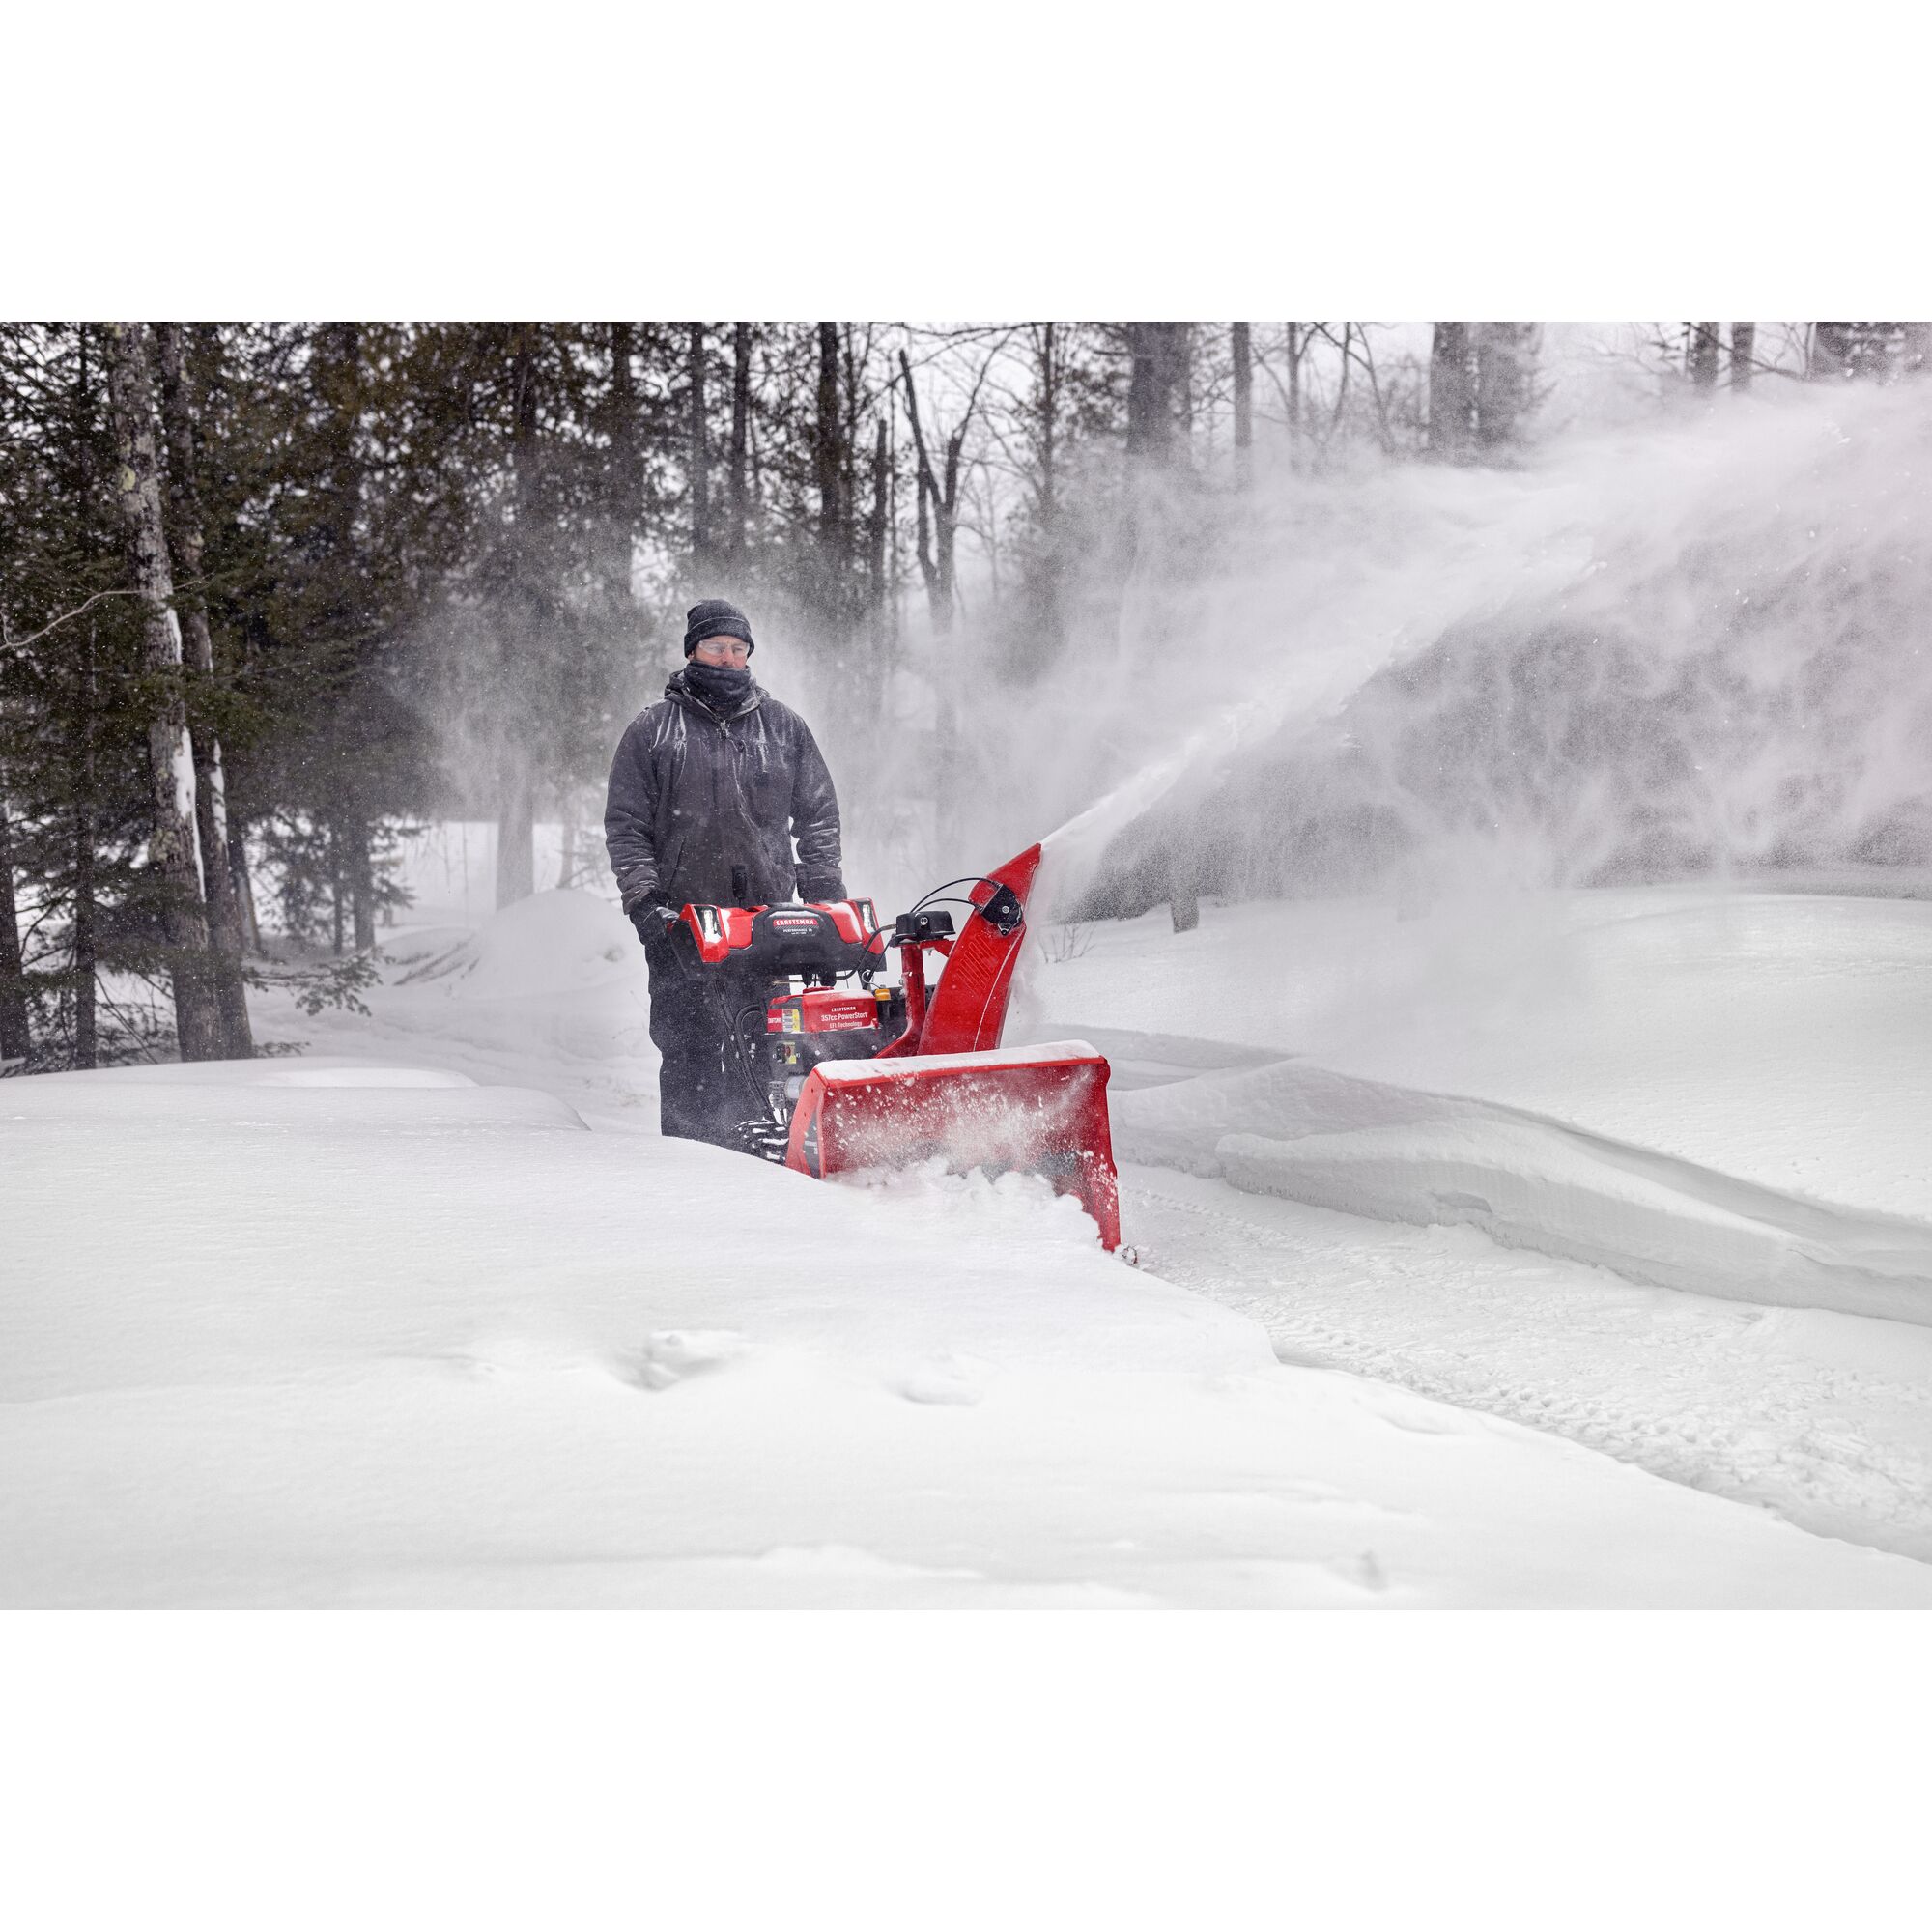 CRAFTSMAN Performance 28 Gas Snow Blower clearning driveway near wooded area